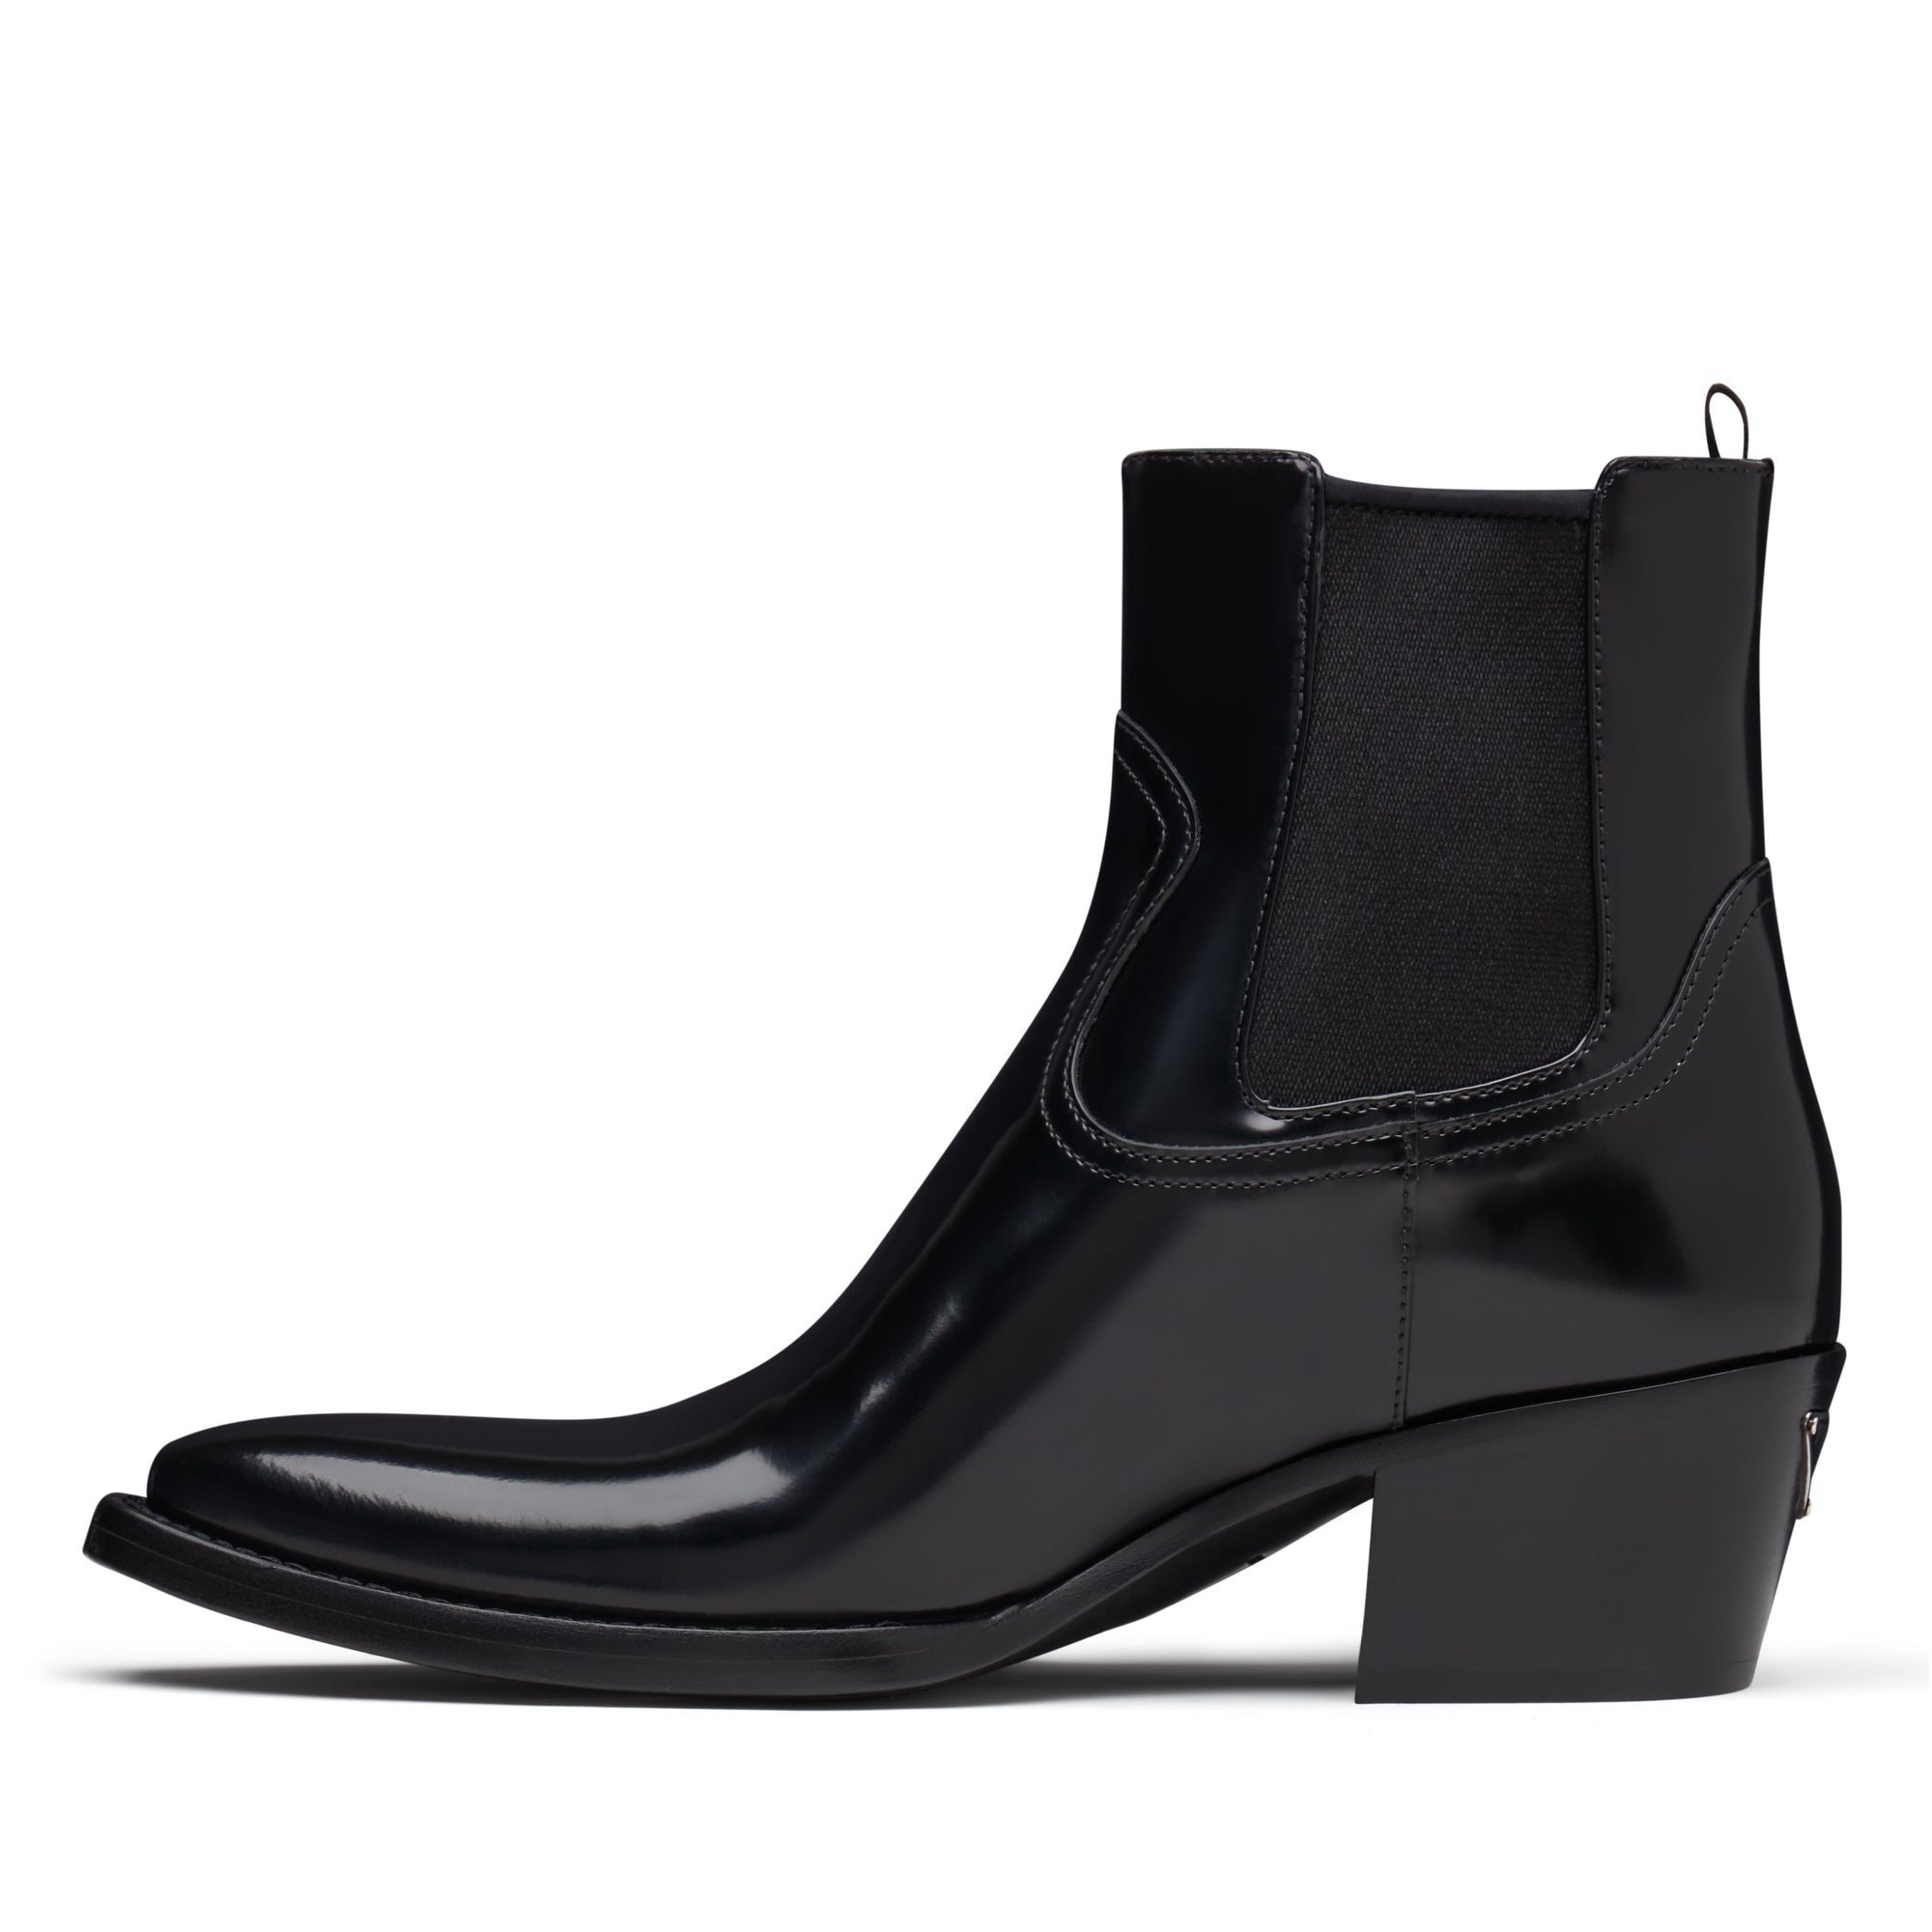 Prada - Women’s Brushed Leather Ankle Boot - (Black) view 2